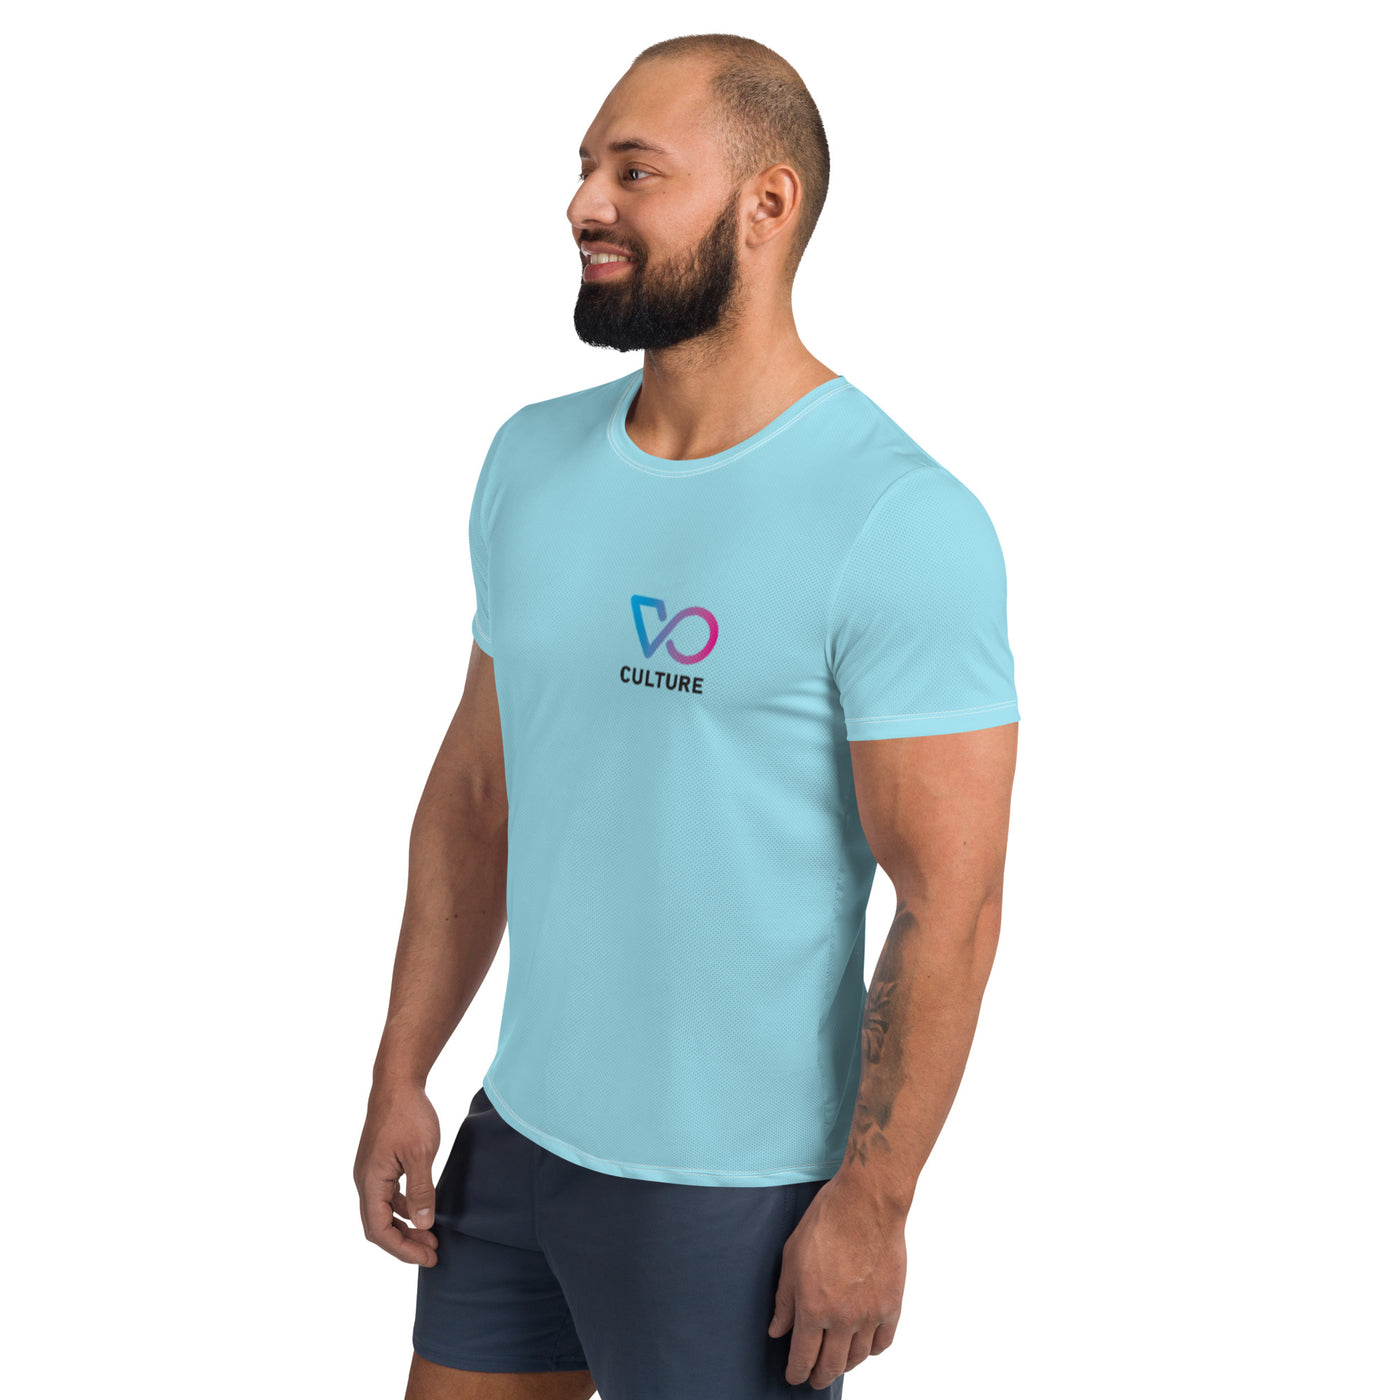 VO CULTURE Male Athletic T-shirt